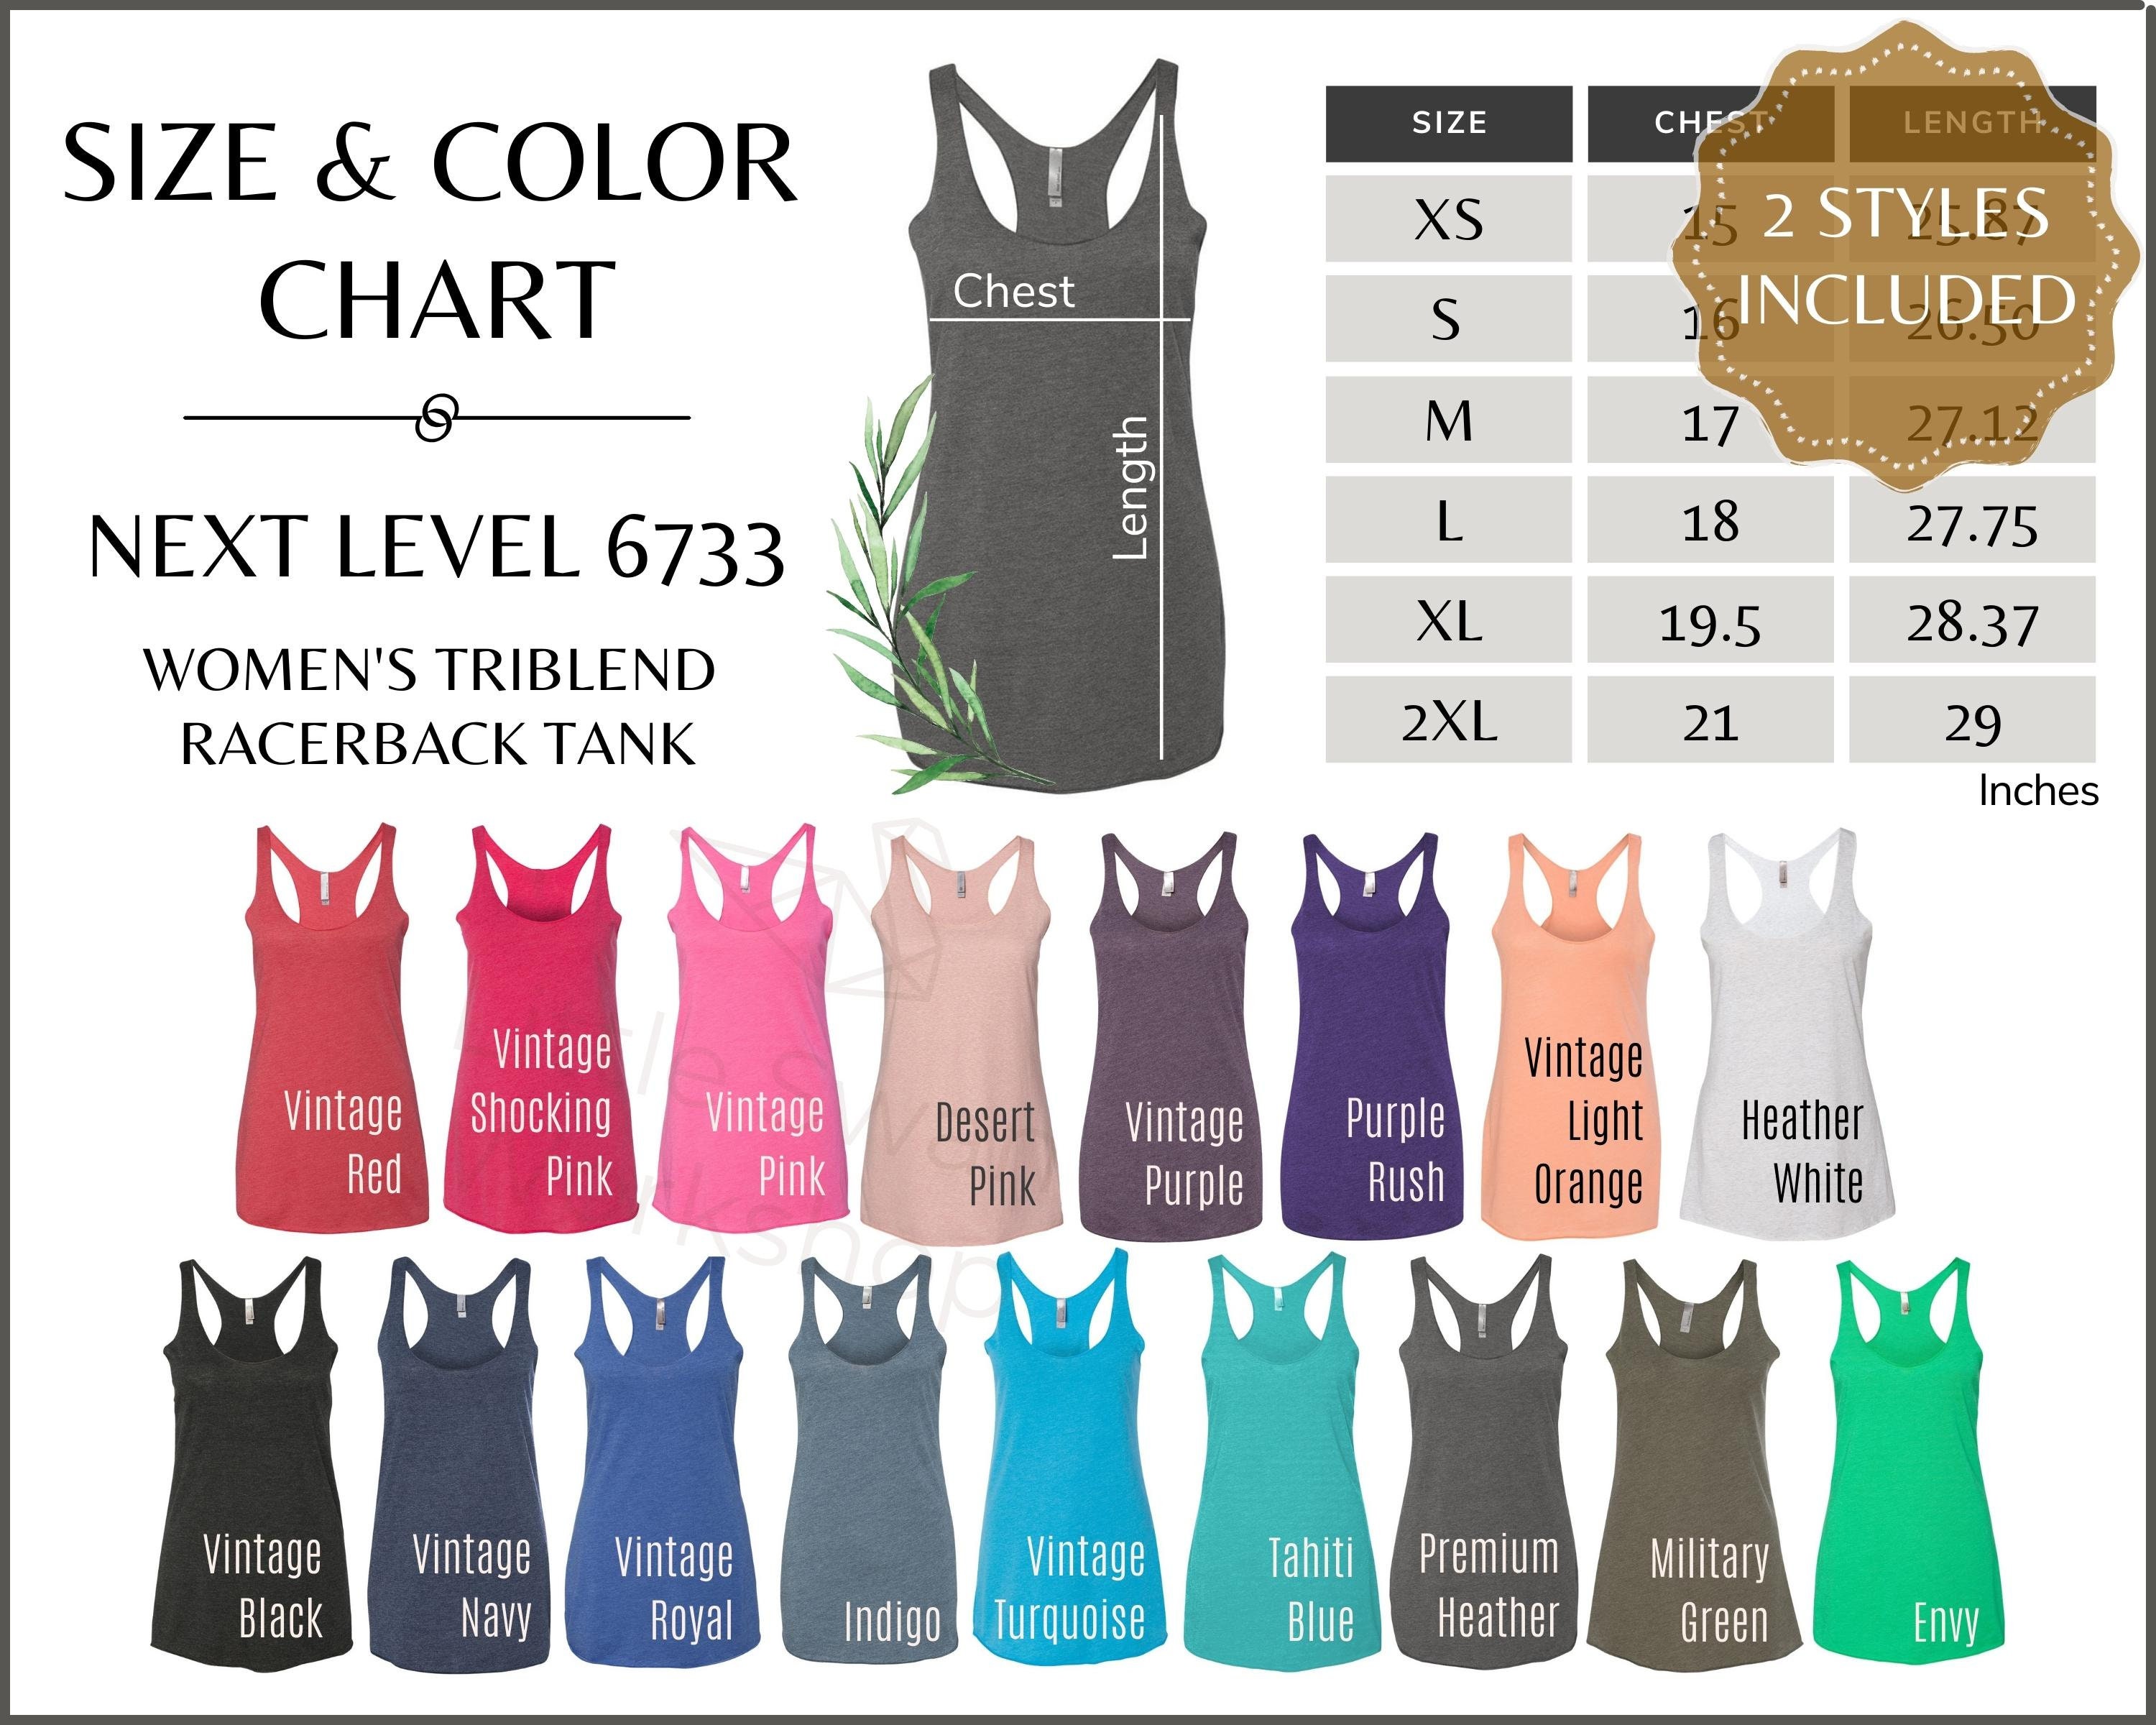 Next Level 6733 Color Chart, Racerback Tank 6733 Size and Color Chart ...